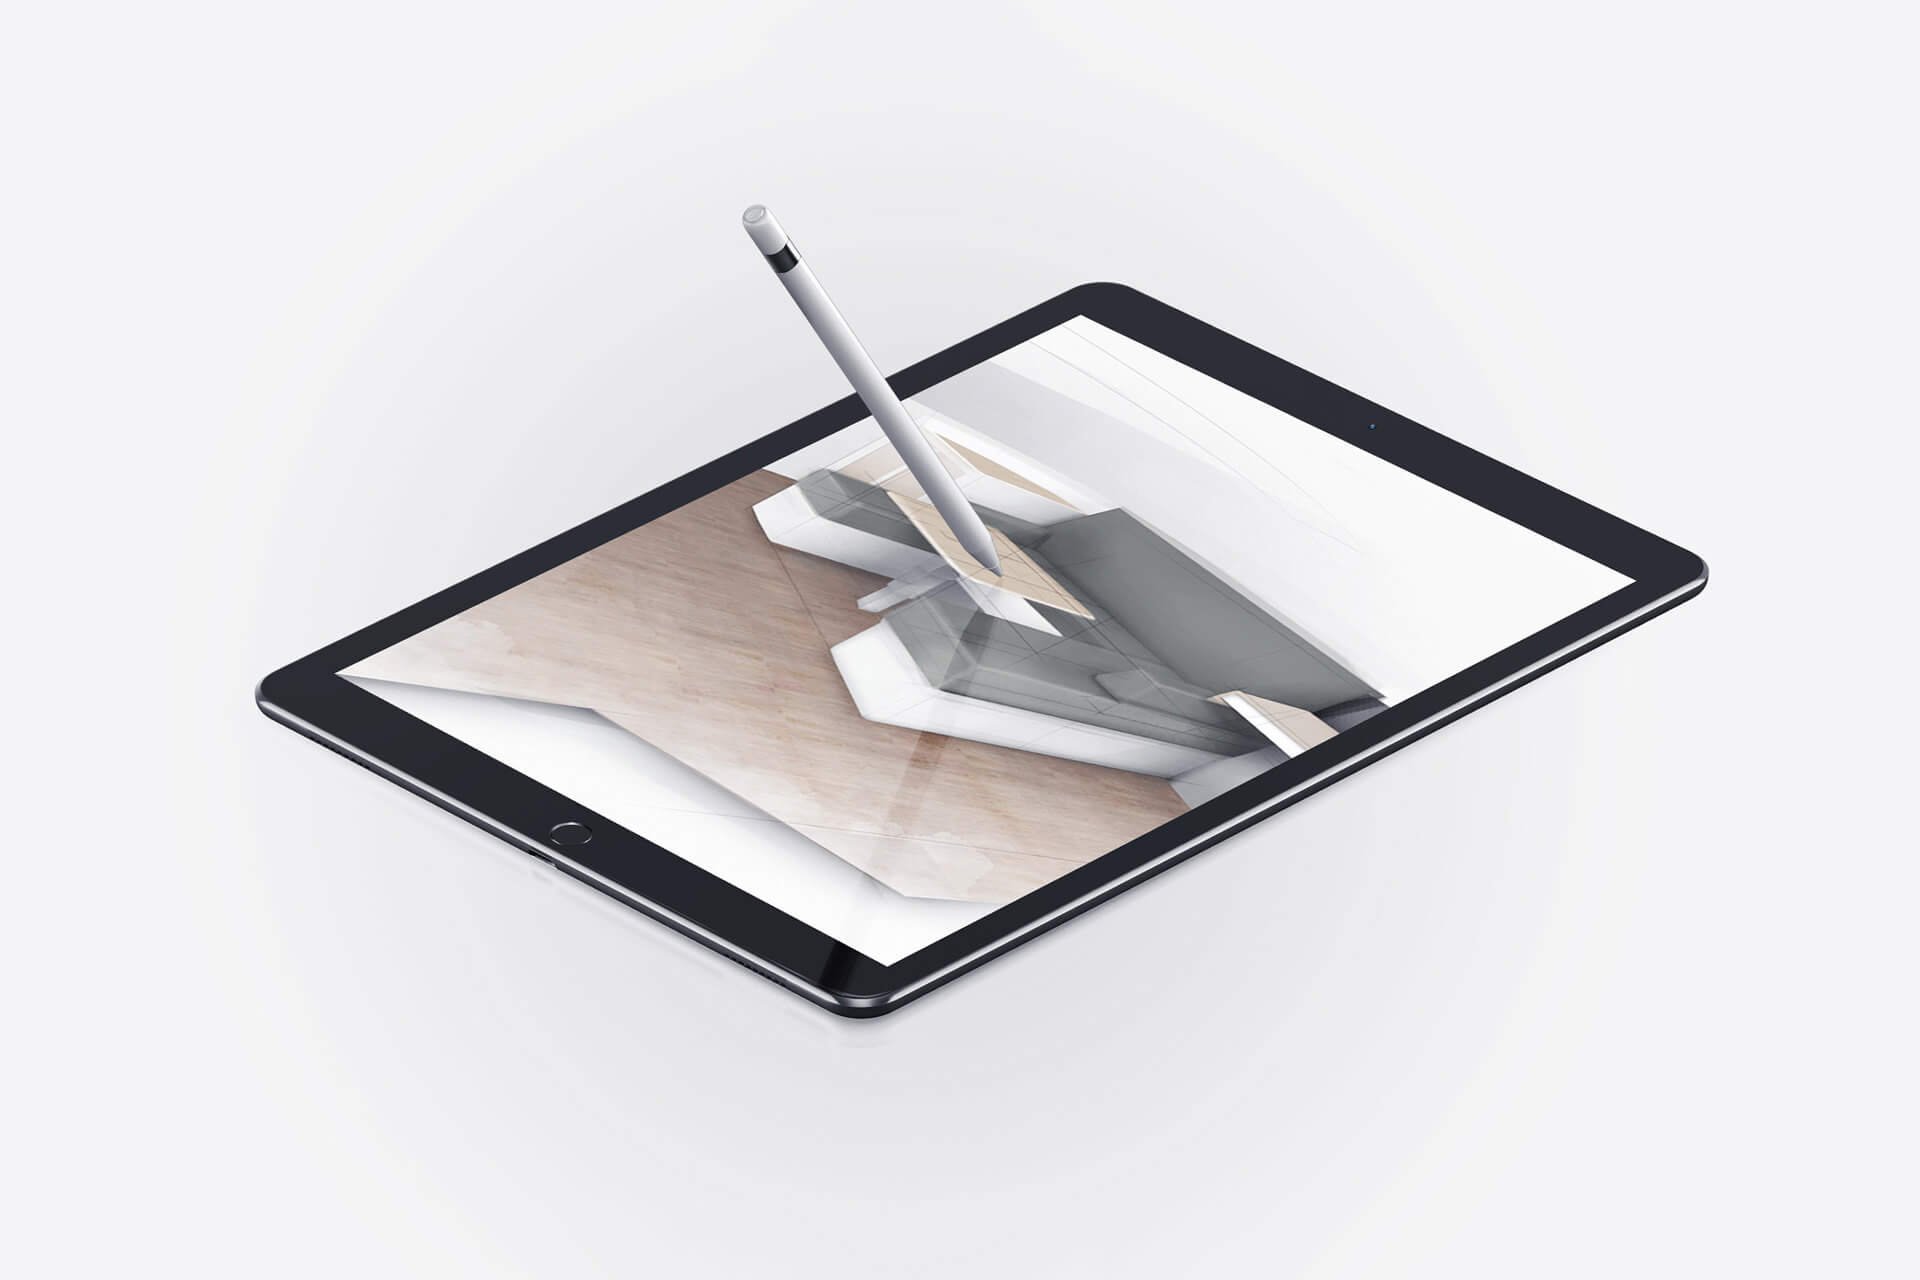 stylus poised over a tablet making design drawings of furniture